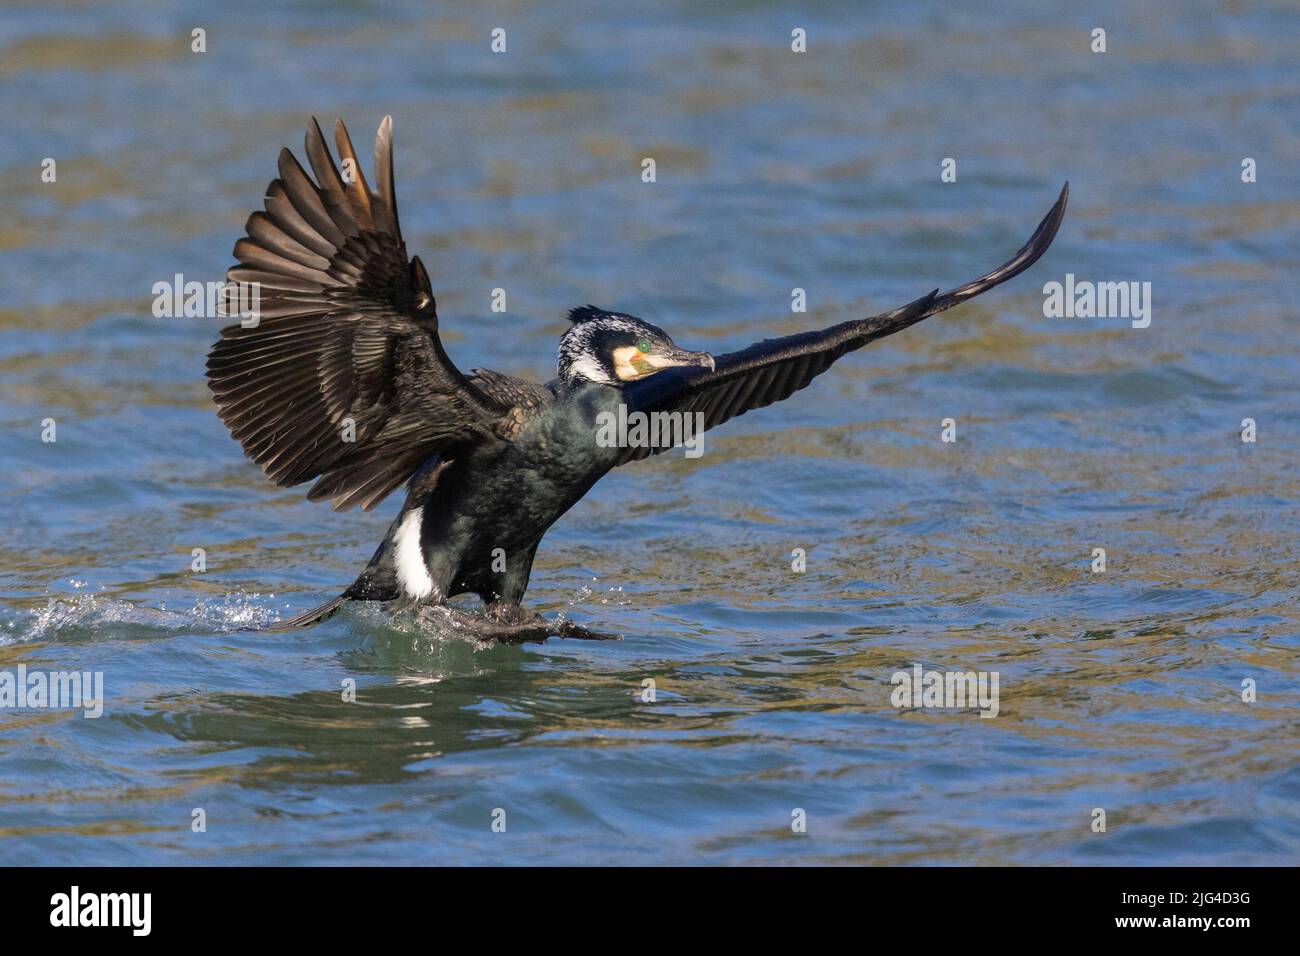 Great Cormorant (Phalacrocorax carbo sinensis), adult landing on the water, Campania, Italy Stock Photo